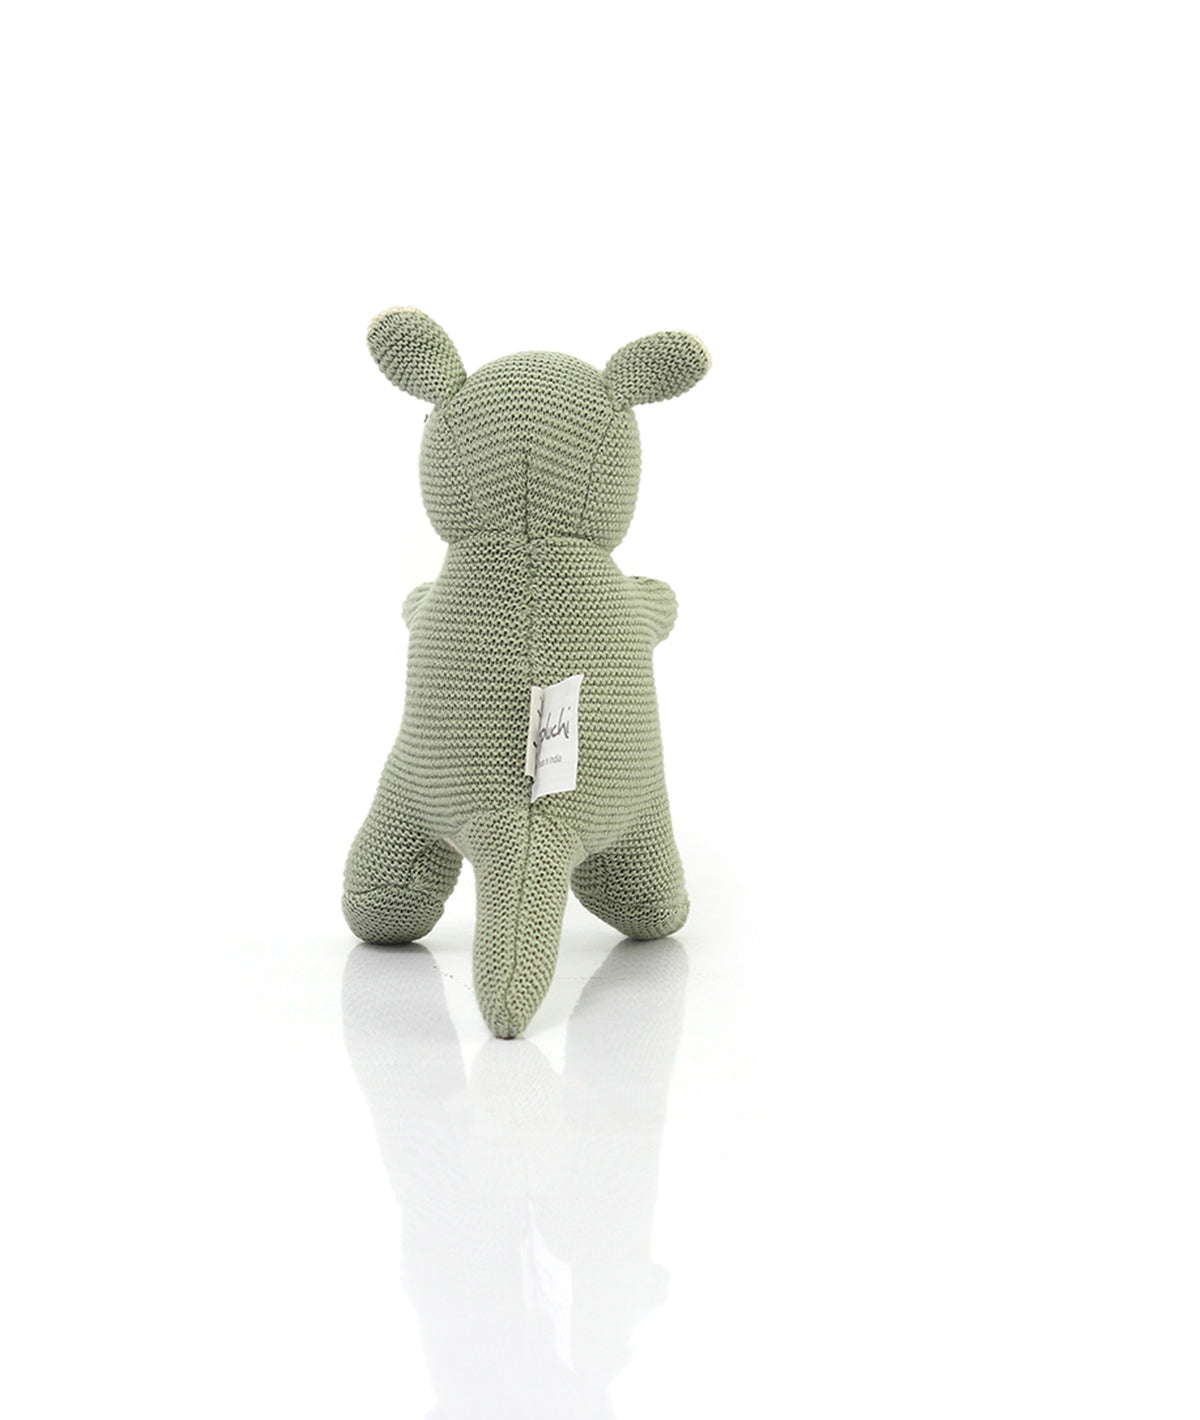 Doodle Kangaroo Rattle Cotton Knitted Stuffed Soft Toy (Pistachio Green & Natural)